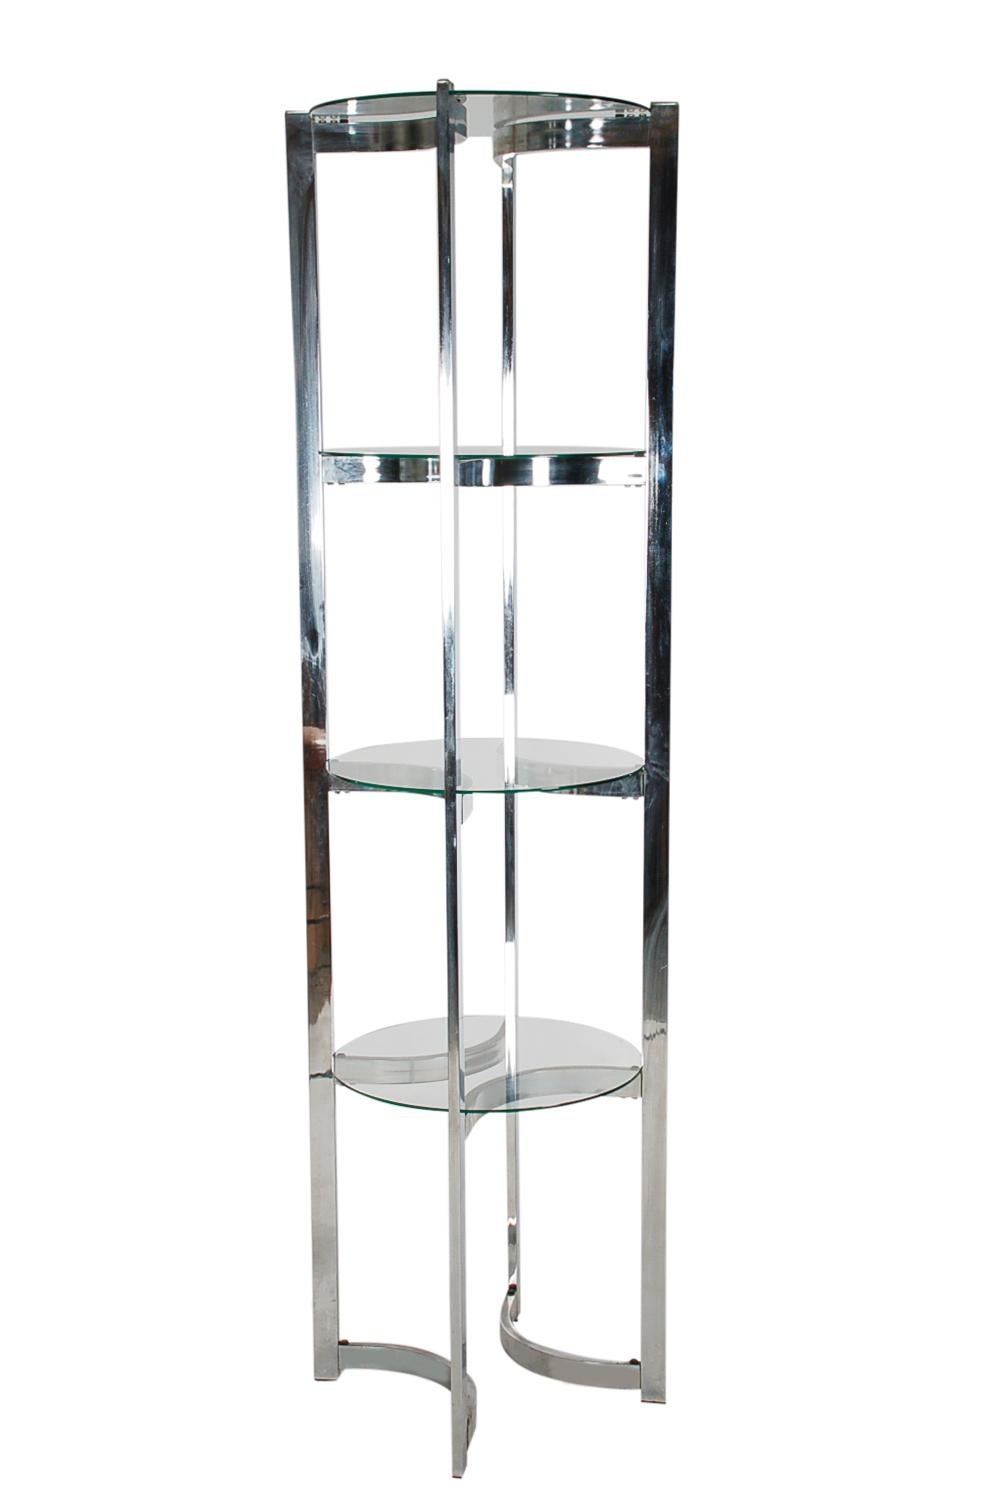 A circular étagère or corner shelving unit in the style of Milo Baughman from the 1970s. It features a chrome-plated steel structure with round clear glass shelves.